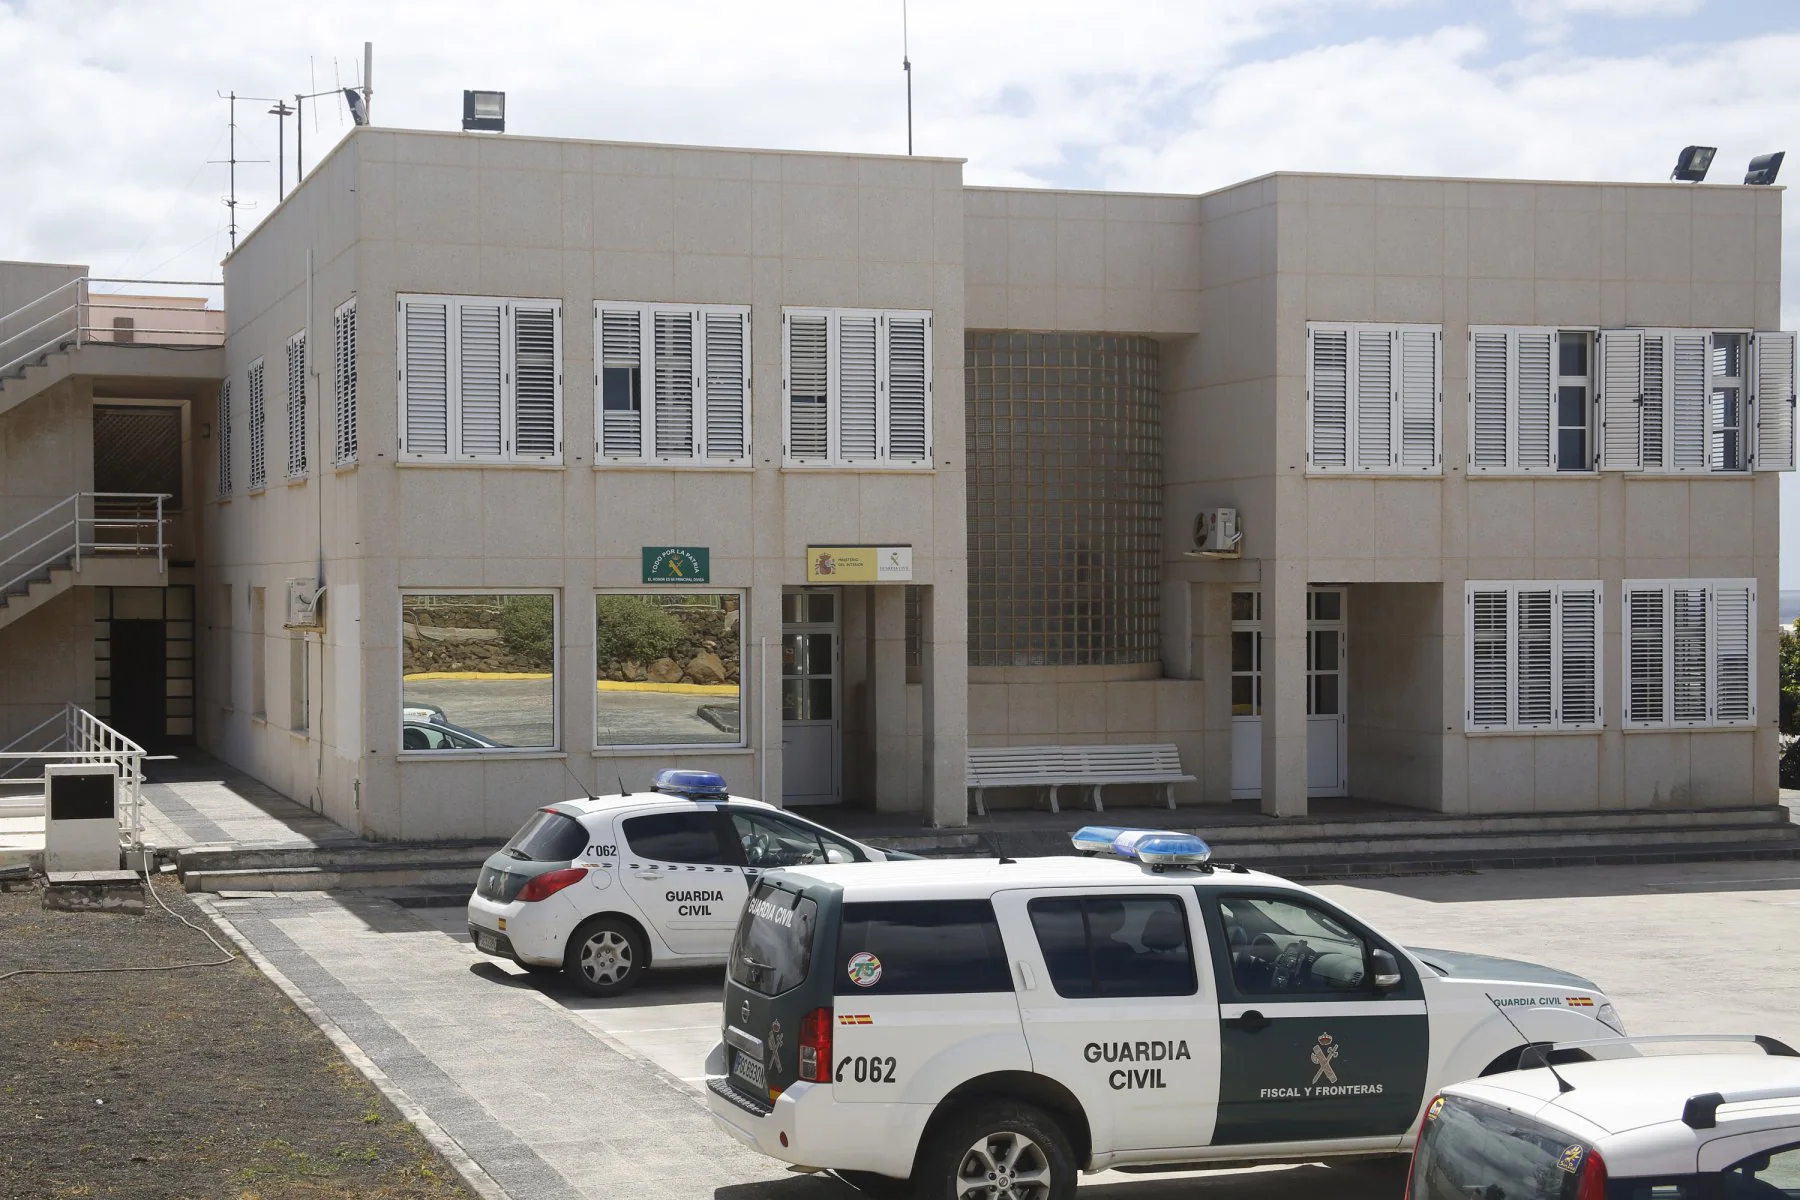 Archive image of the Civil Guard barracks in Teguise (Lanzarote). 